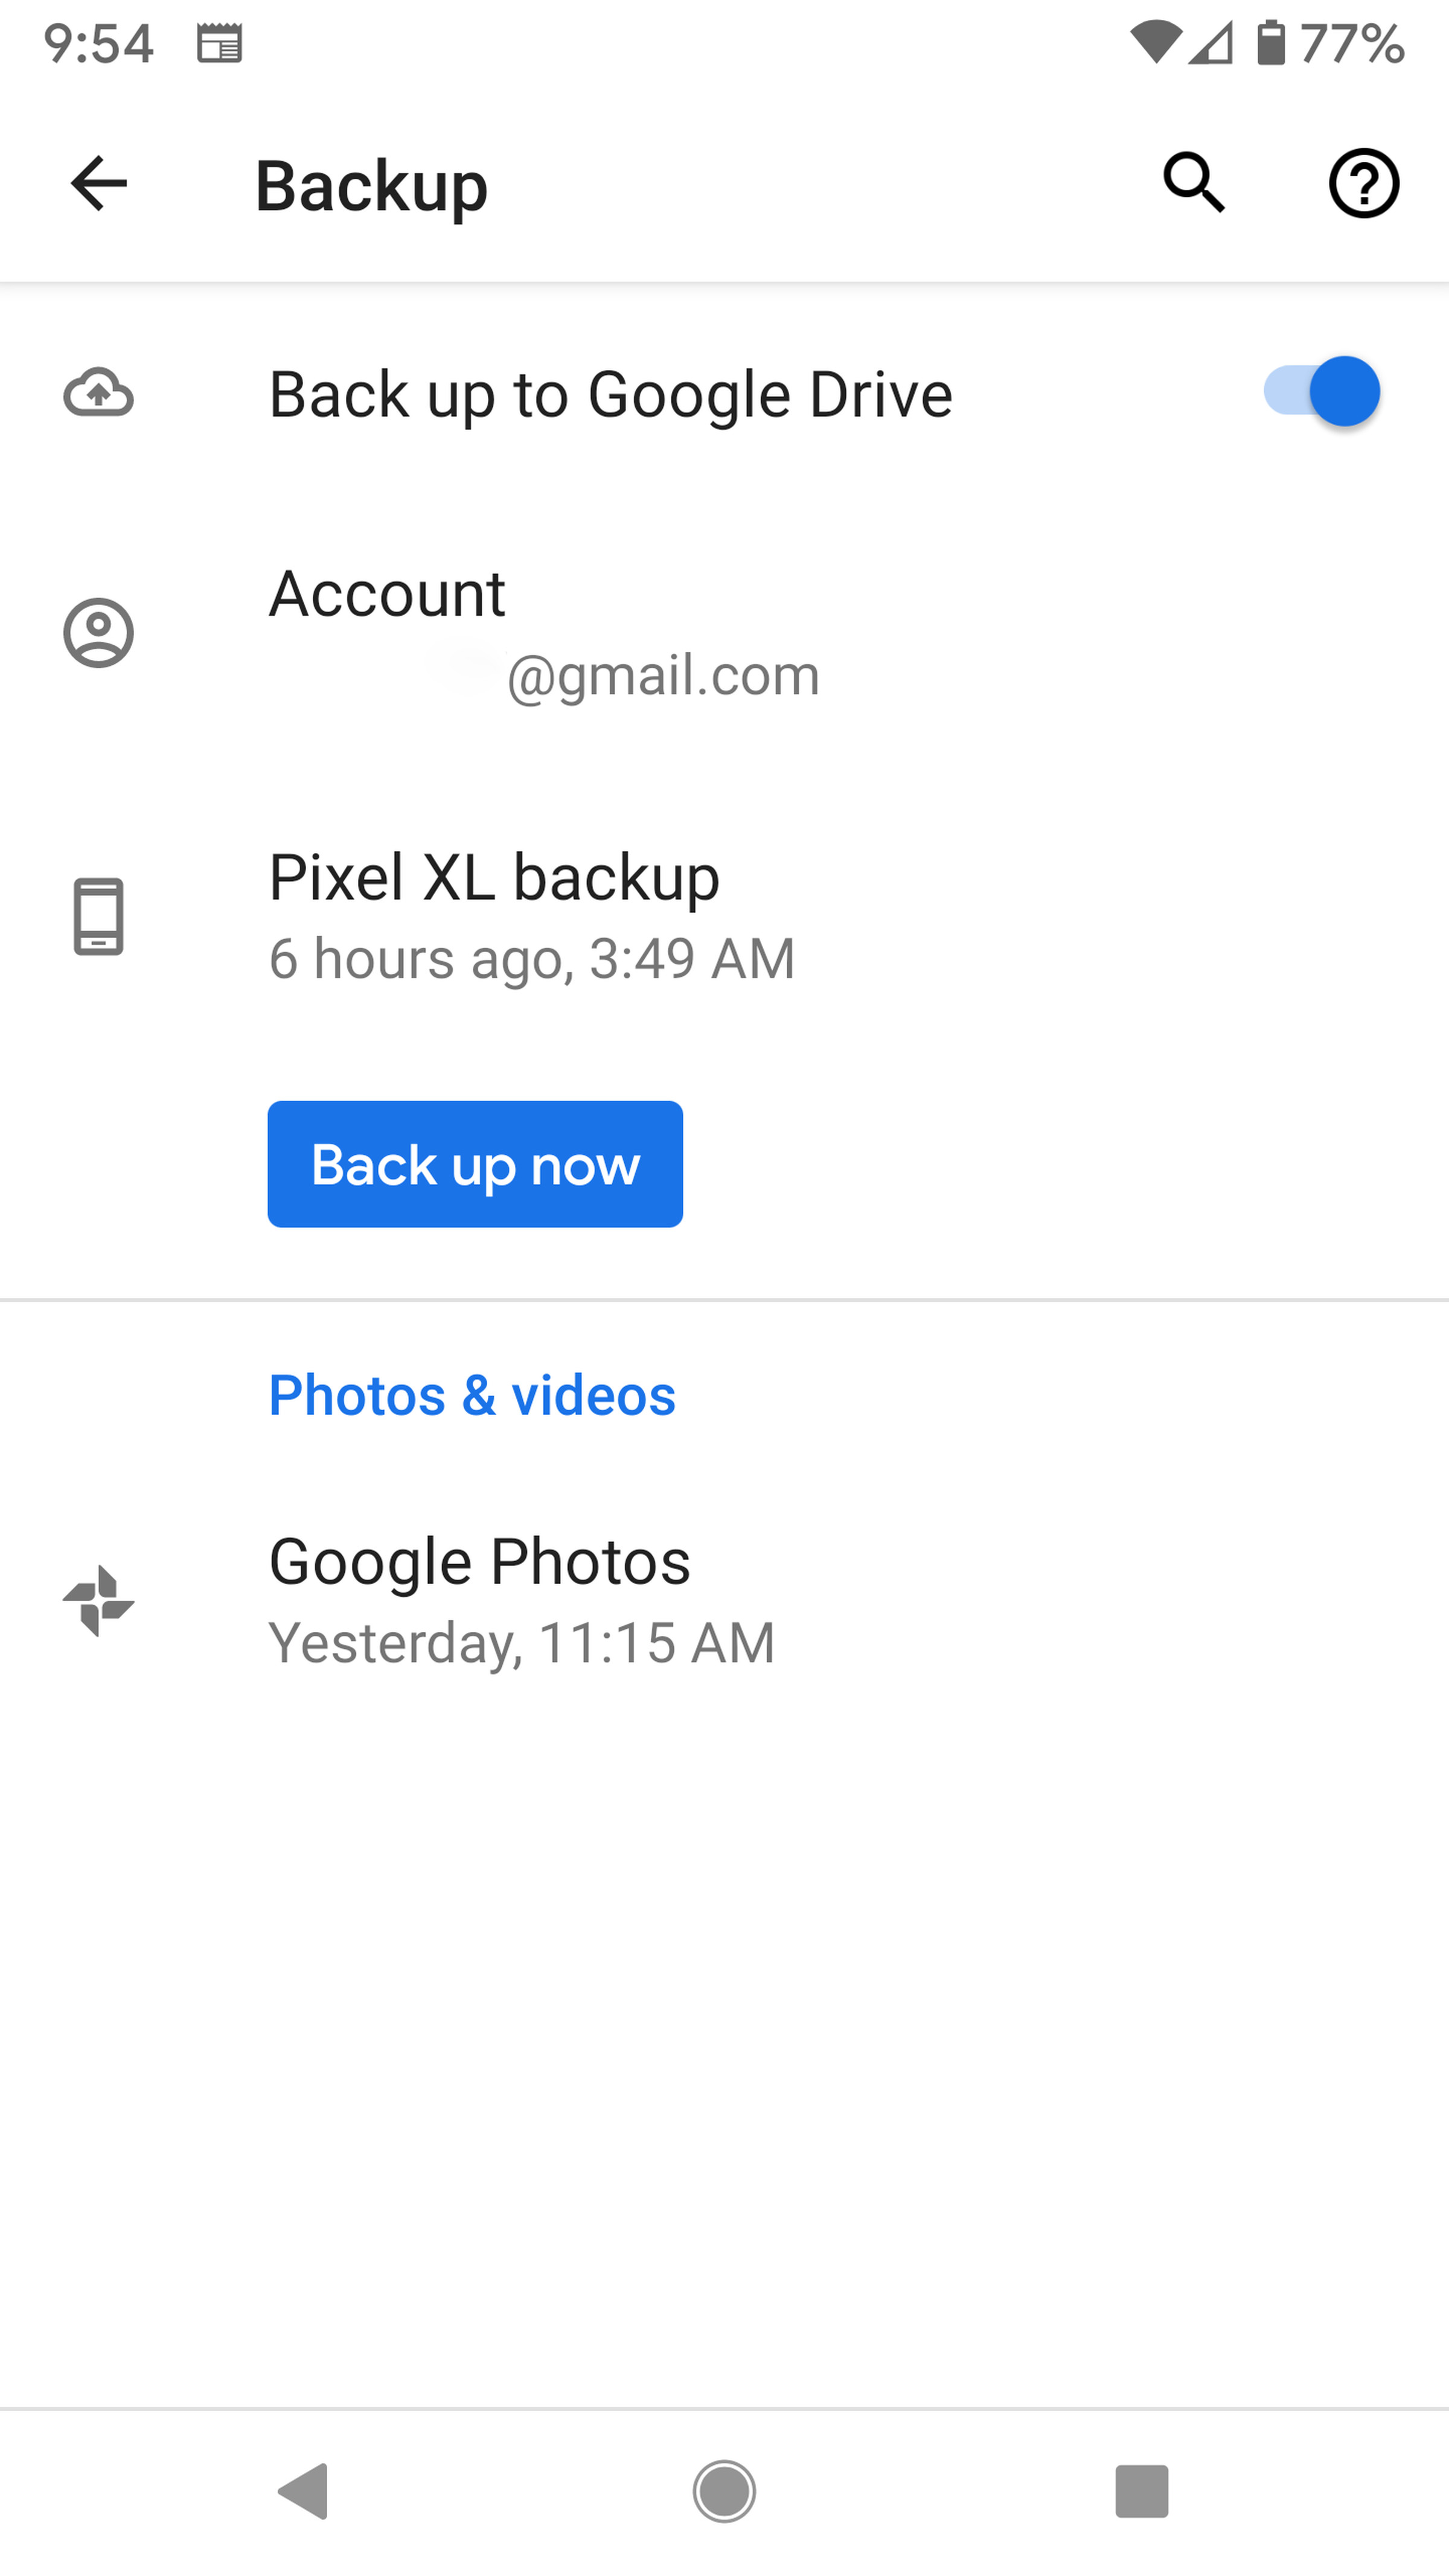 You can back up your app data, call history, and other info to your Google Drive.